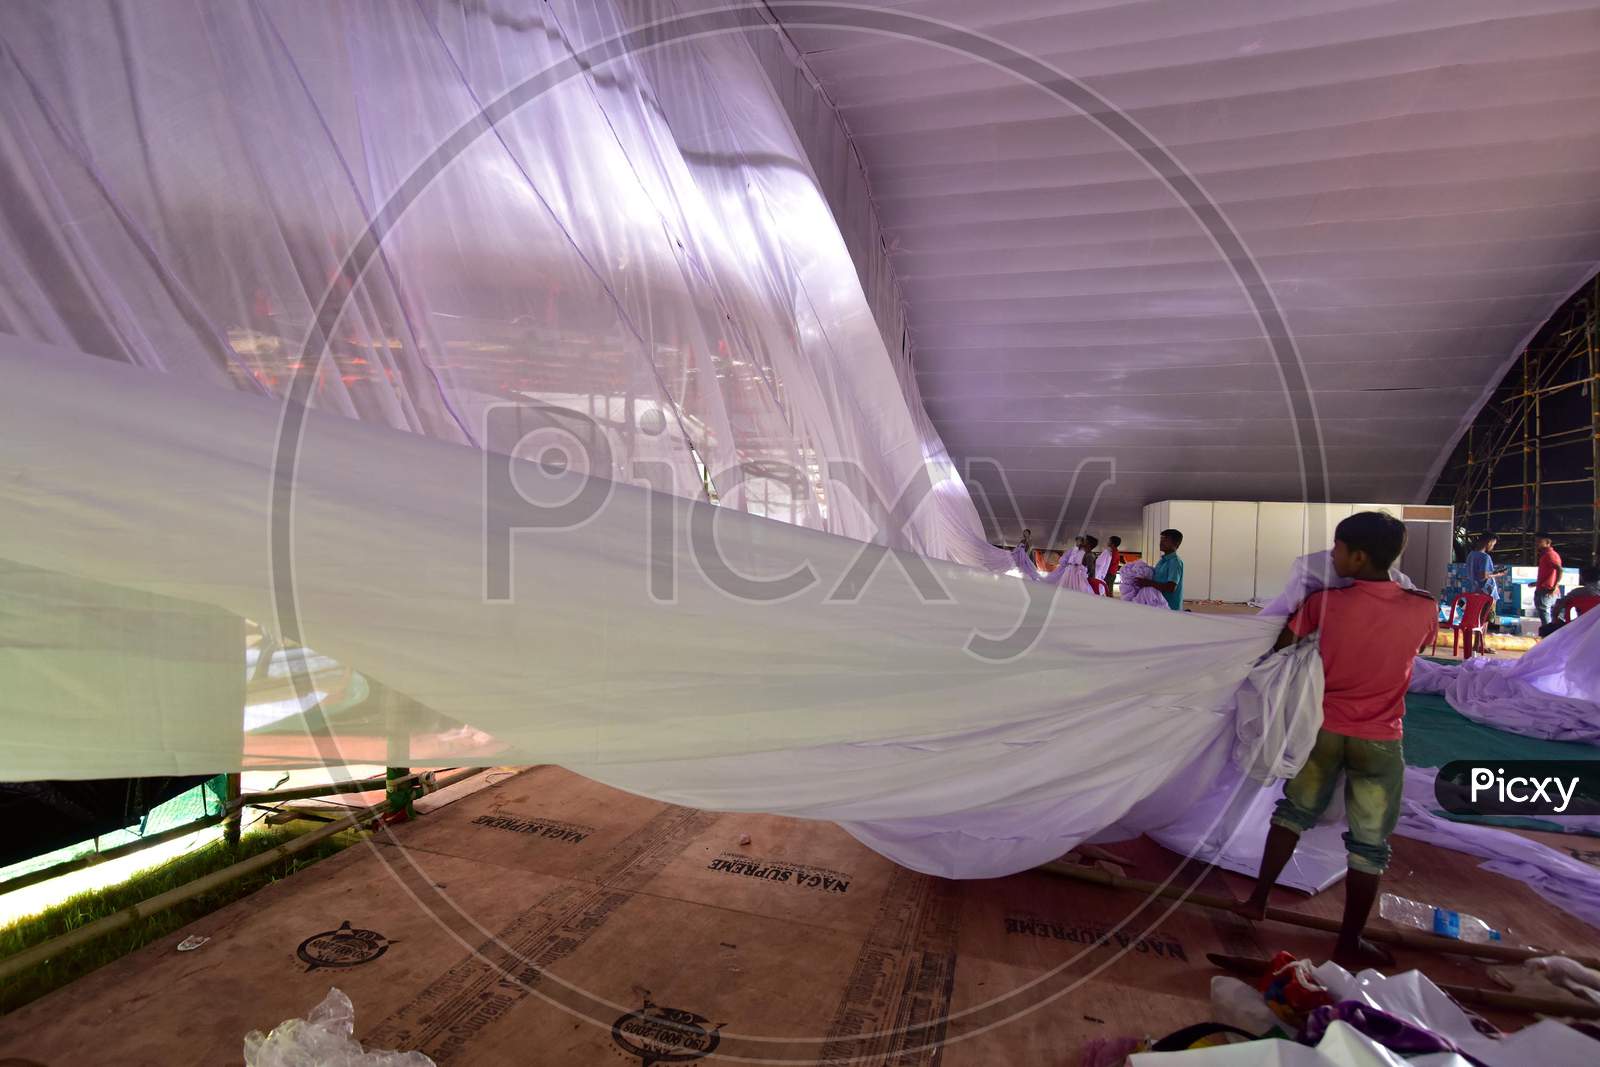 Indian Workers Prepare The Newly-Established Quarantine Center For The Covid-19 Patients During Nationwide Lockdown At Veterinary College Field Khanapara, In Guwahati, Assam, India, 11 June 2020.